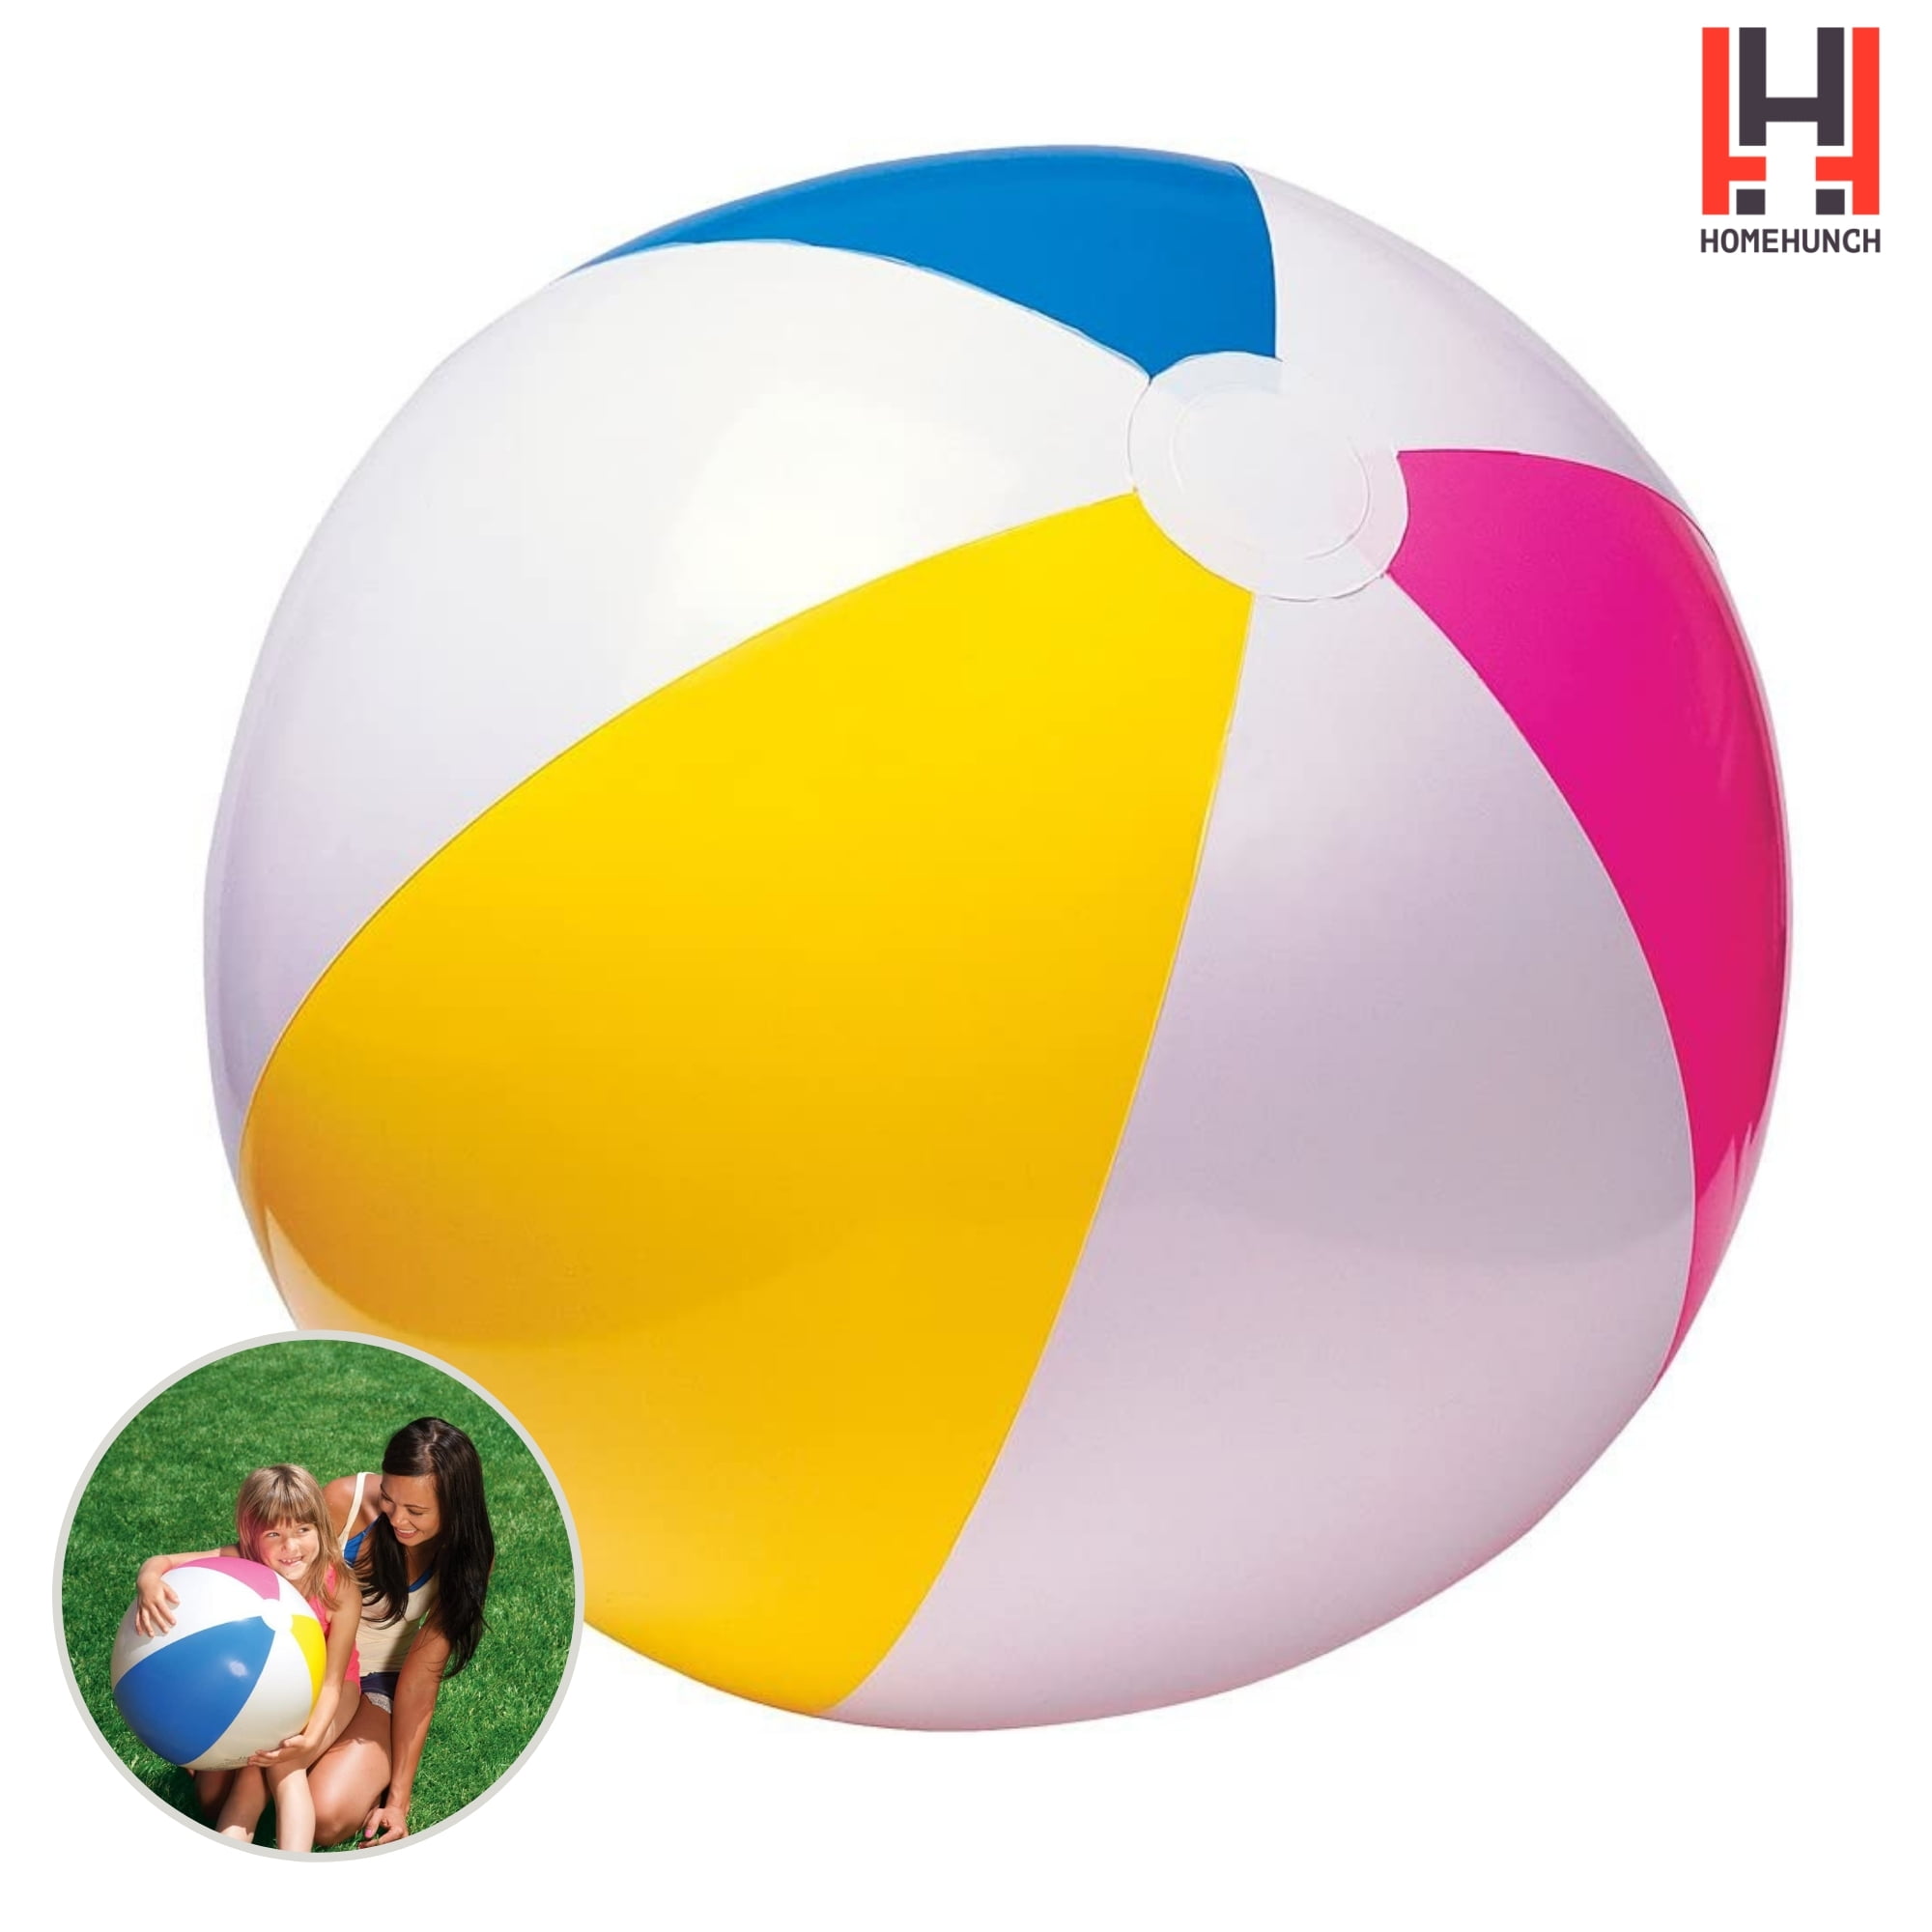 2 x Inflatable Panel Blow Up Beach Ball 20" balls Swimming Garden Toys 